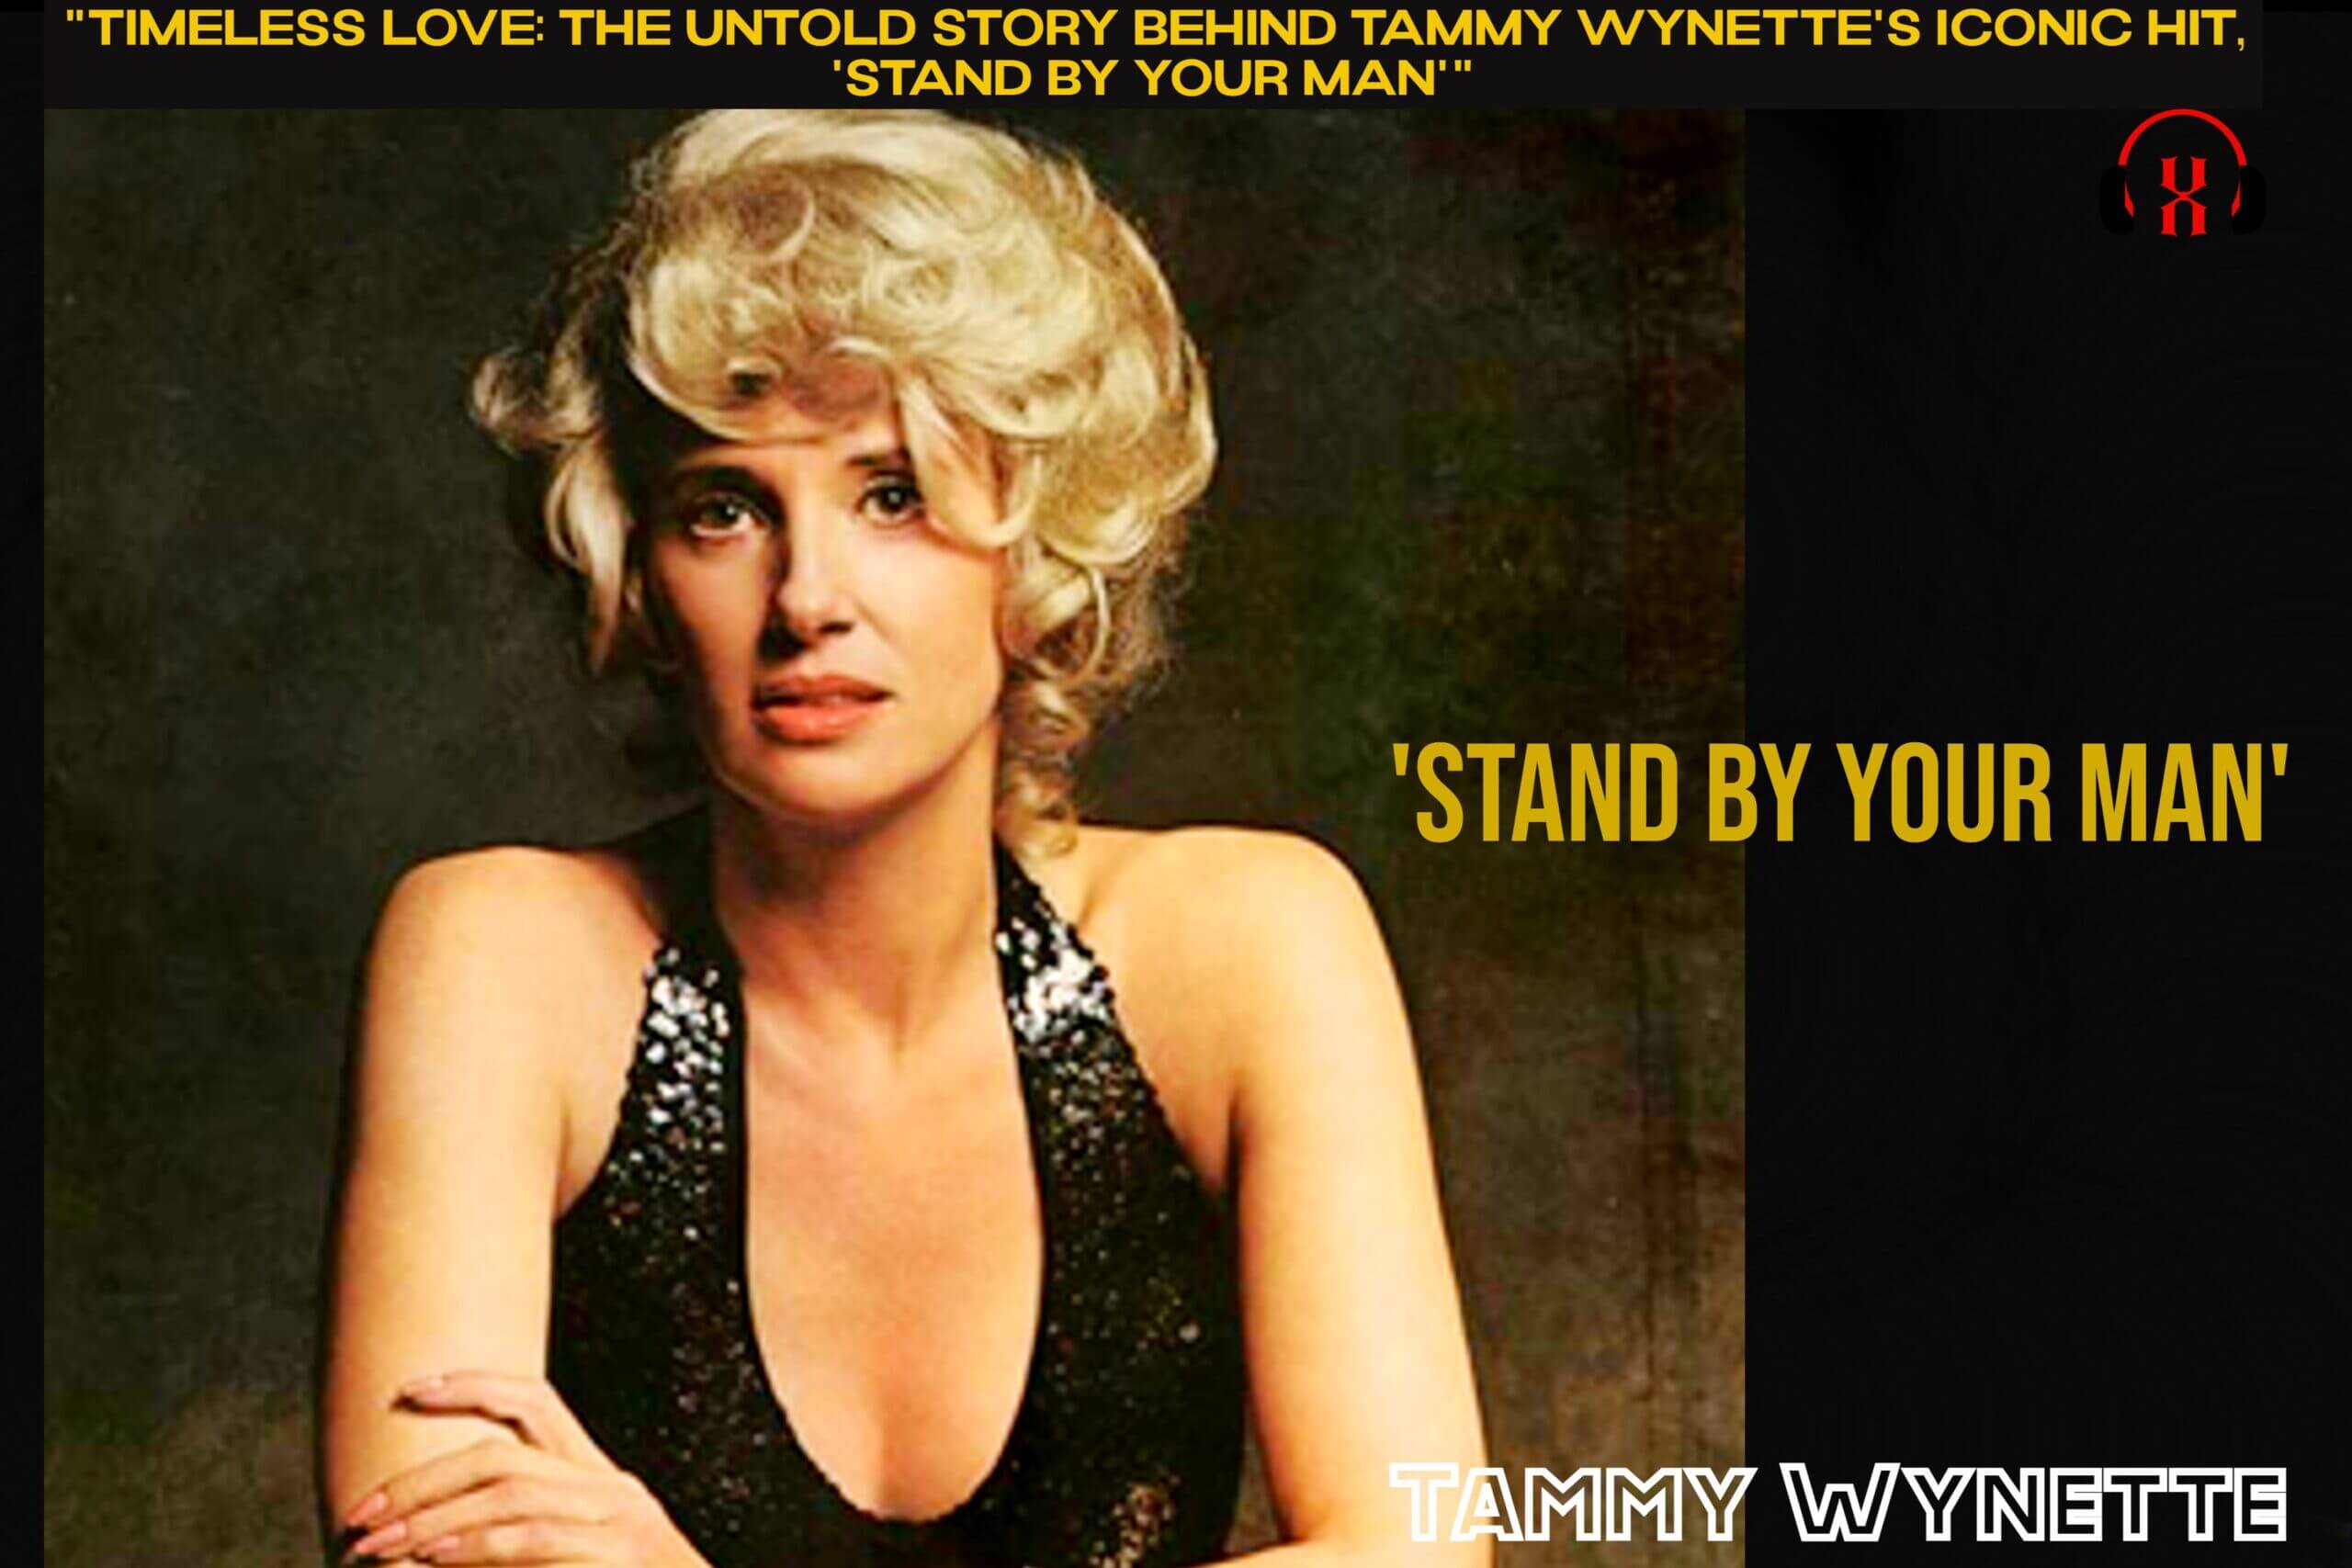 “Timeless Love: The Untold Story Behind Tammy Wynette’s Iconic Hit, ‘Stand By Your Man'”